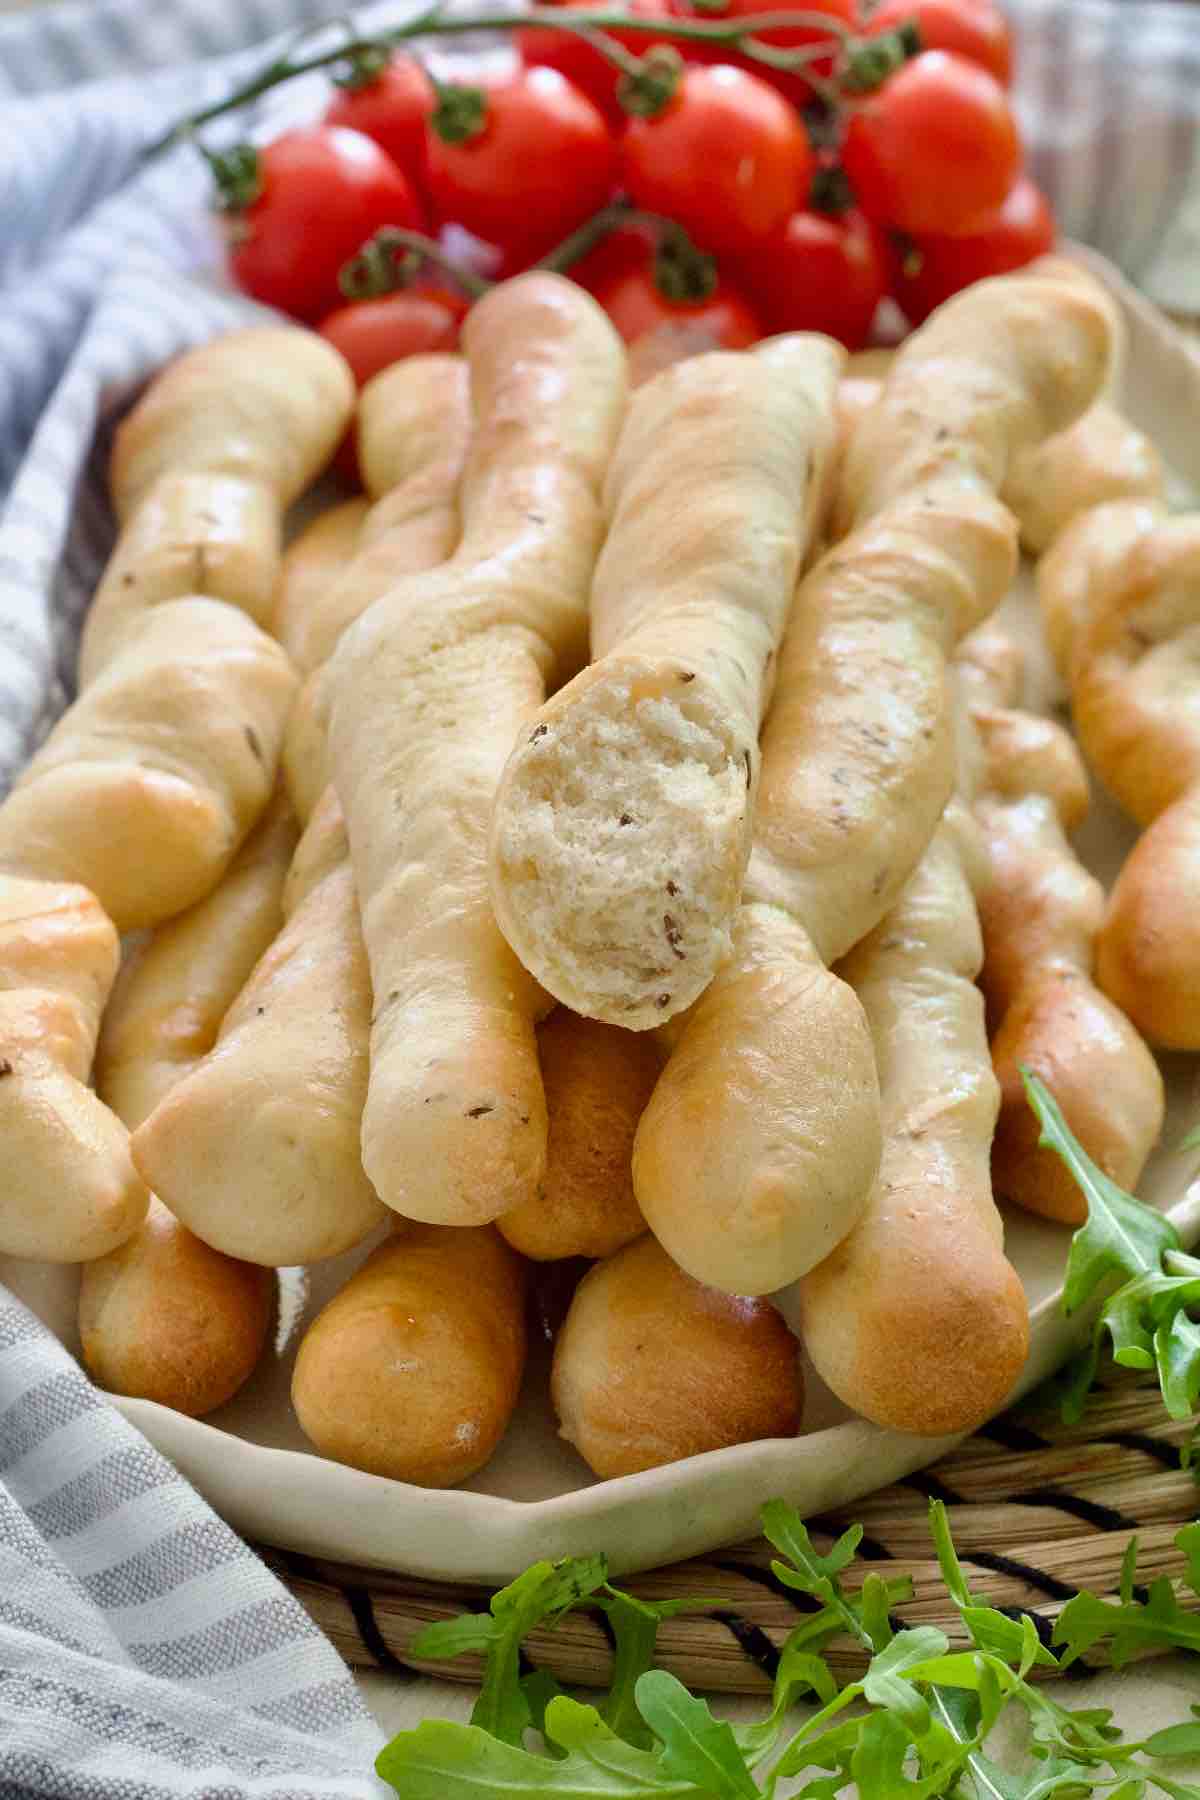 Breadsticks piled up on a platter, cherry tomatoes in the background.